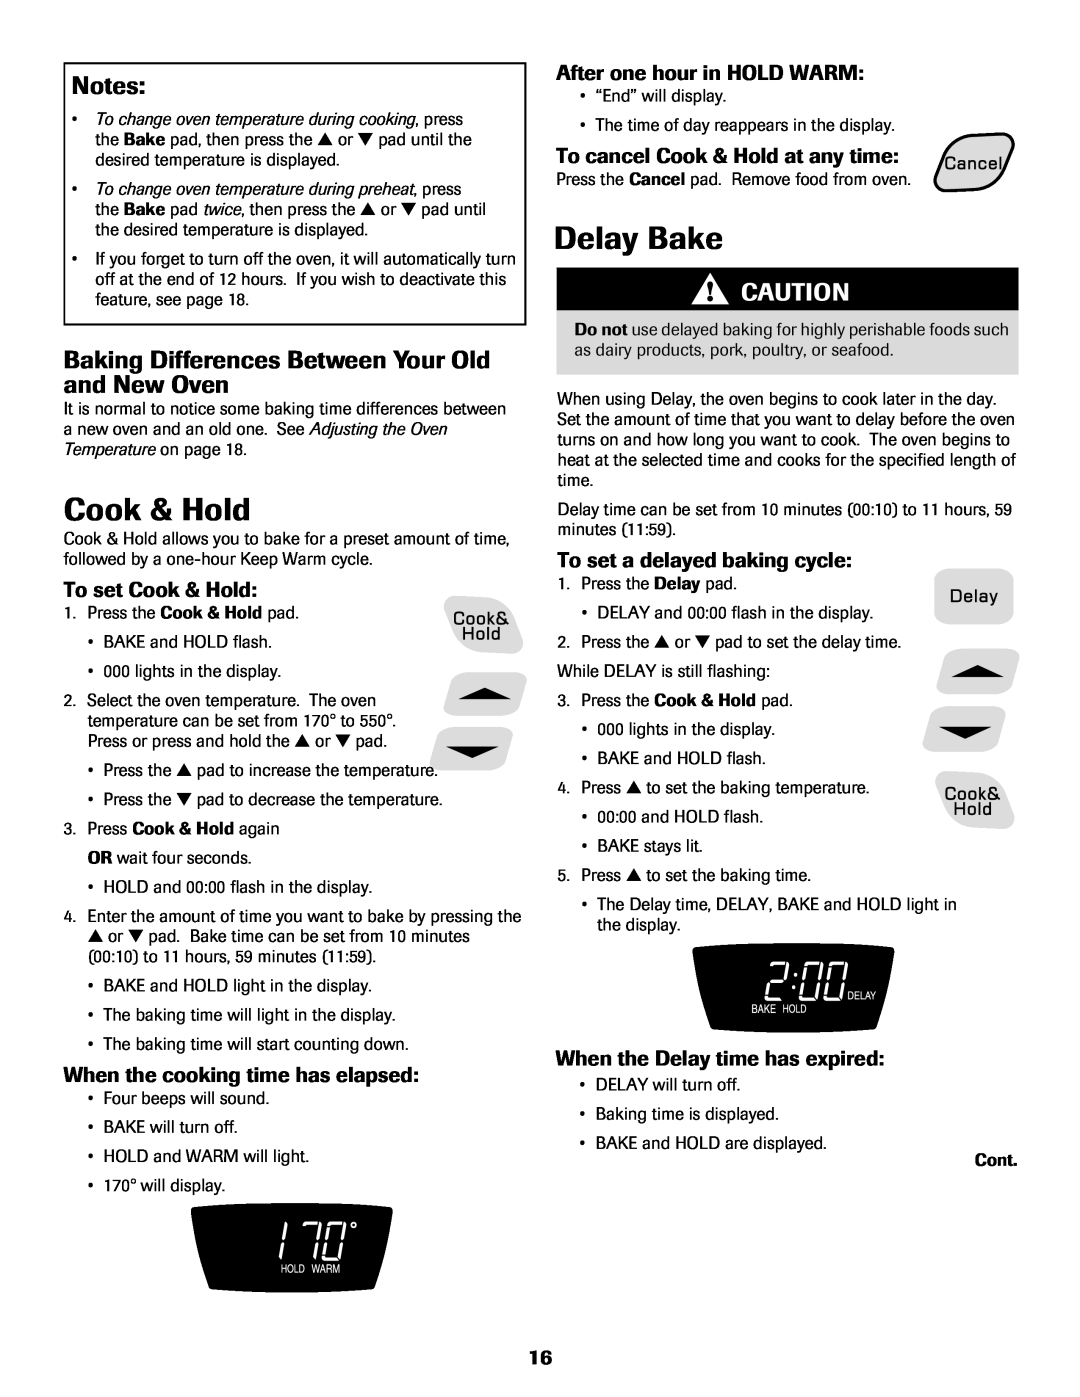 Amana AER5722CAS manual Delay Bake, Baking Differences Between Your Old and New Oven, To set Cook & Hold 